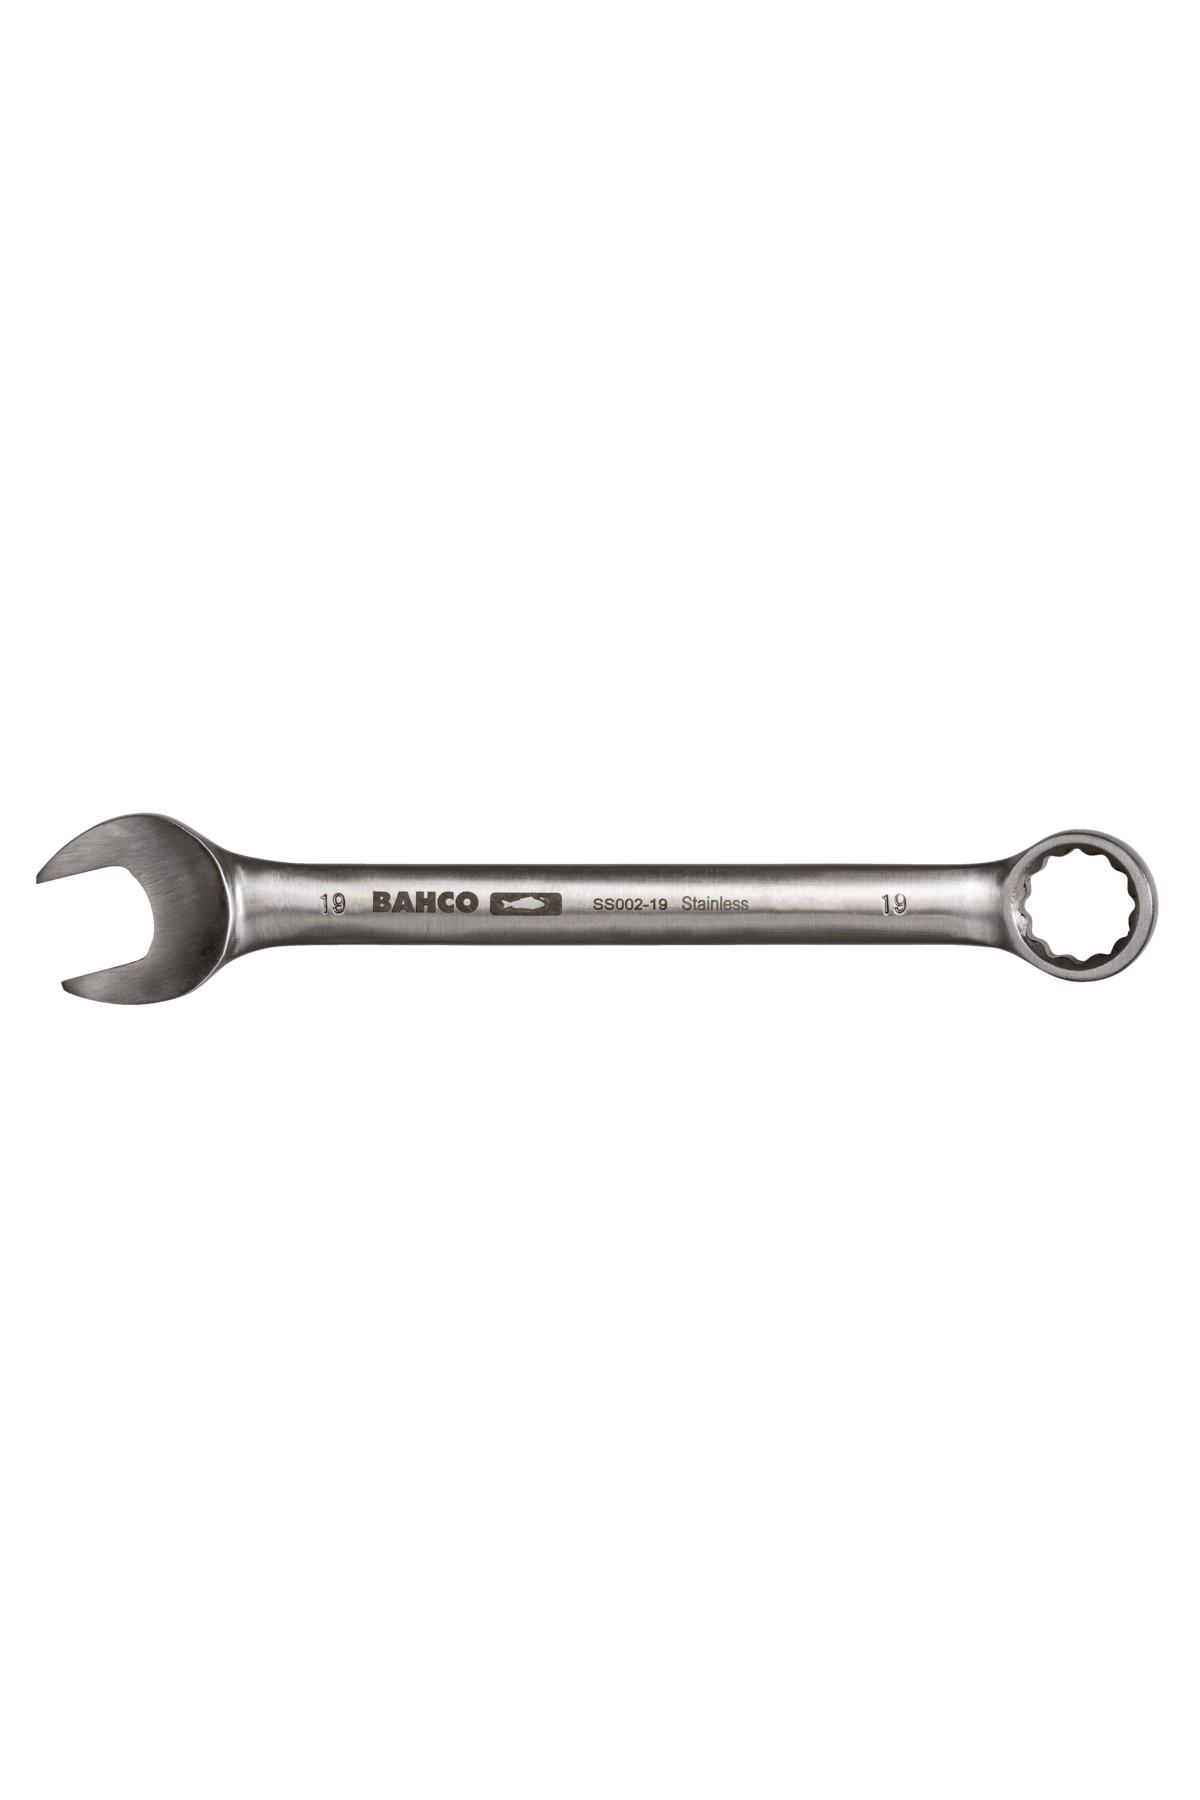 Ring spanner stainless 19mm